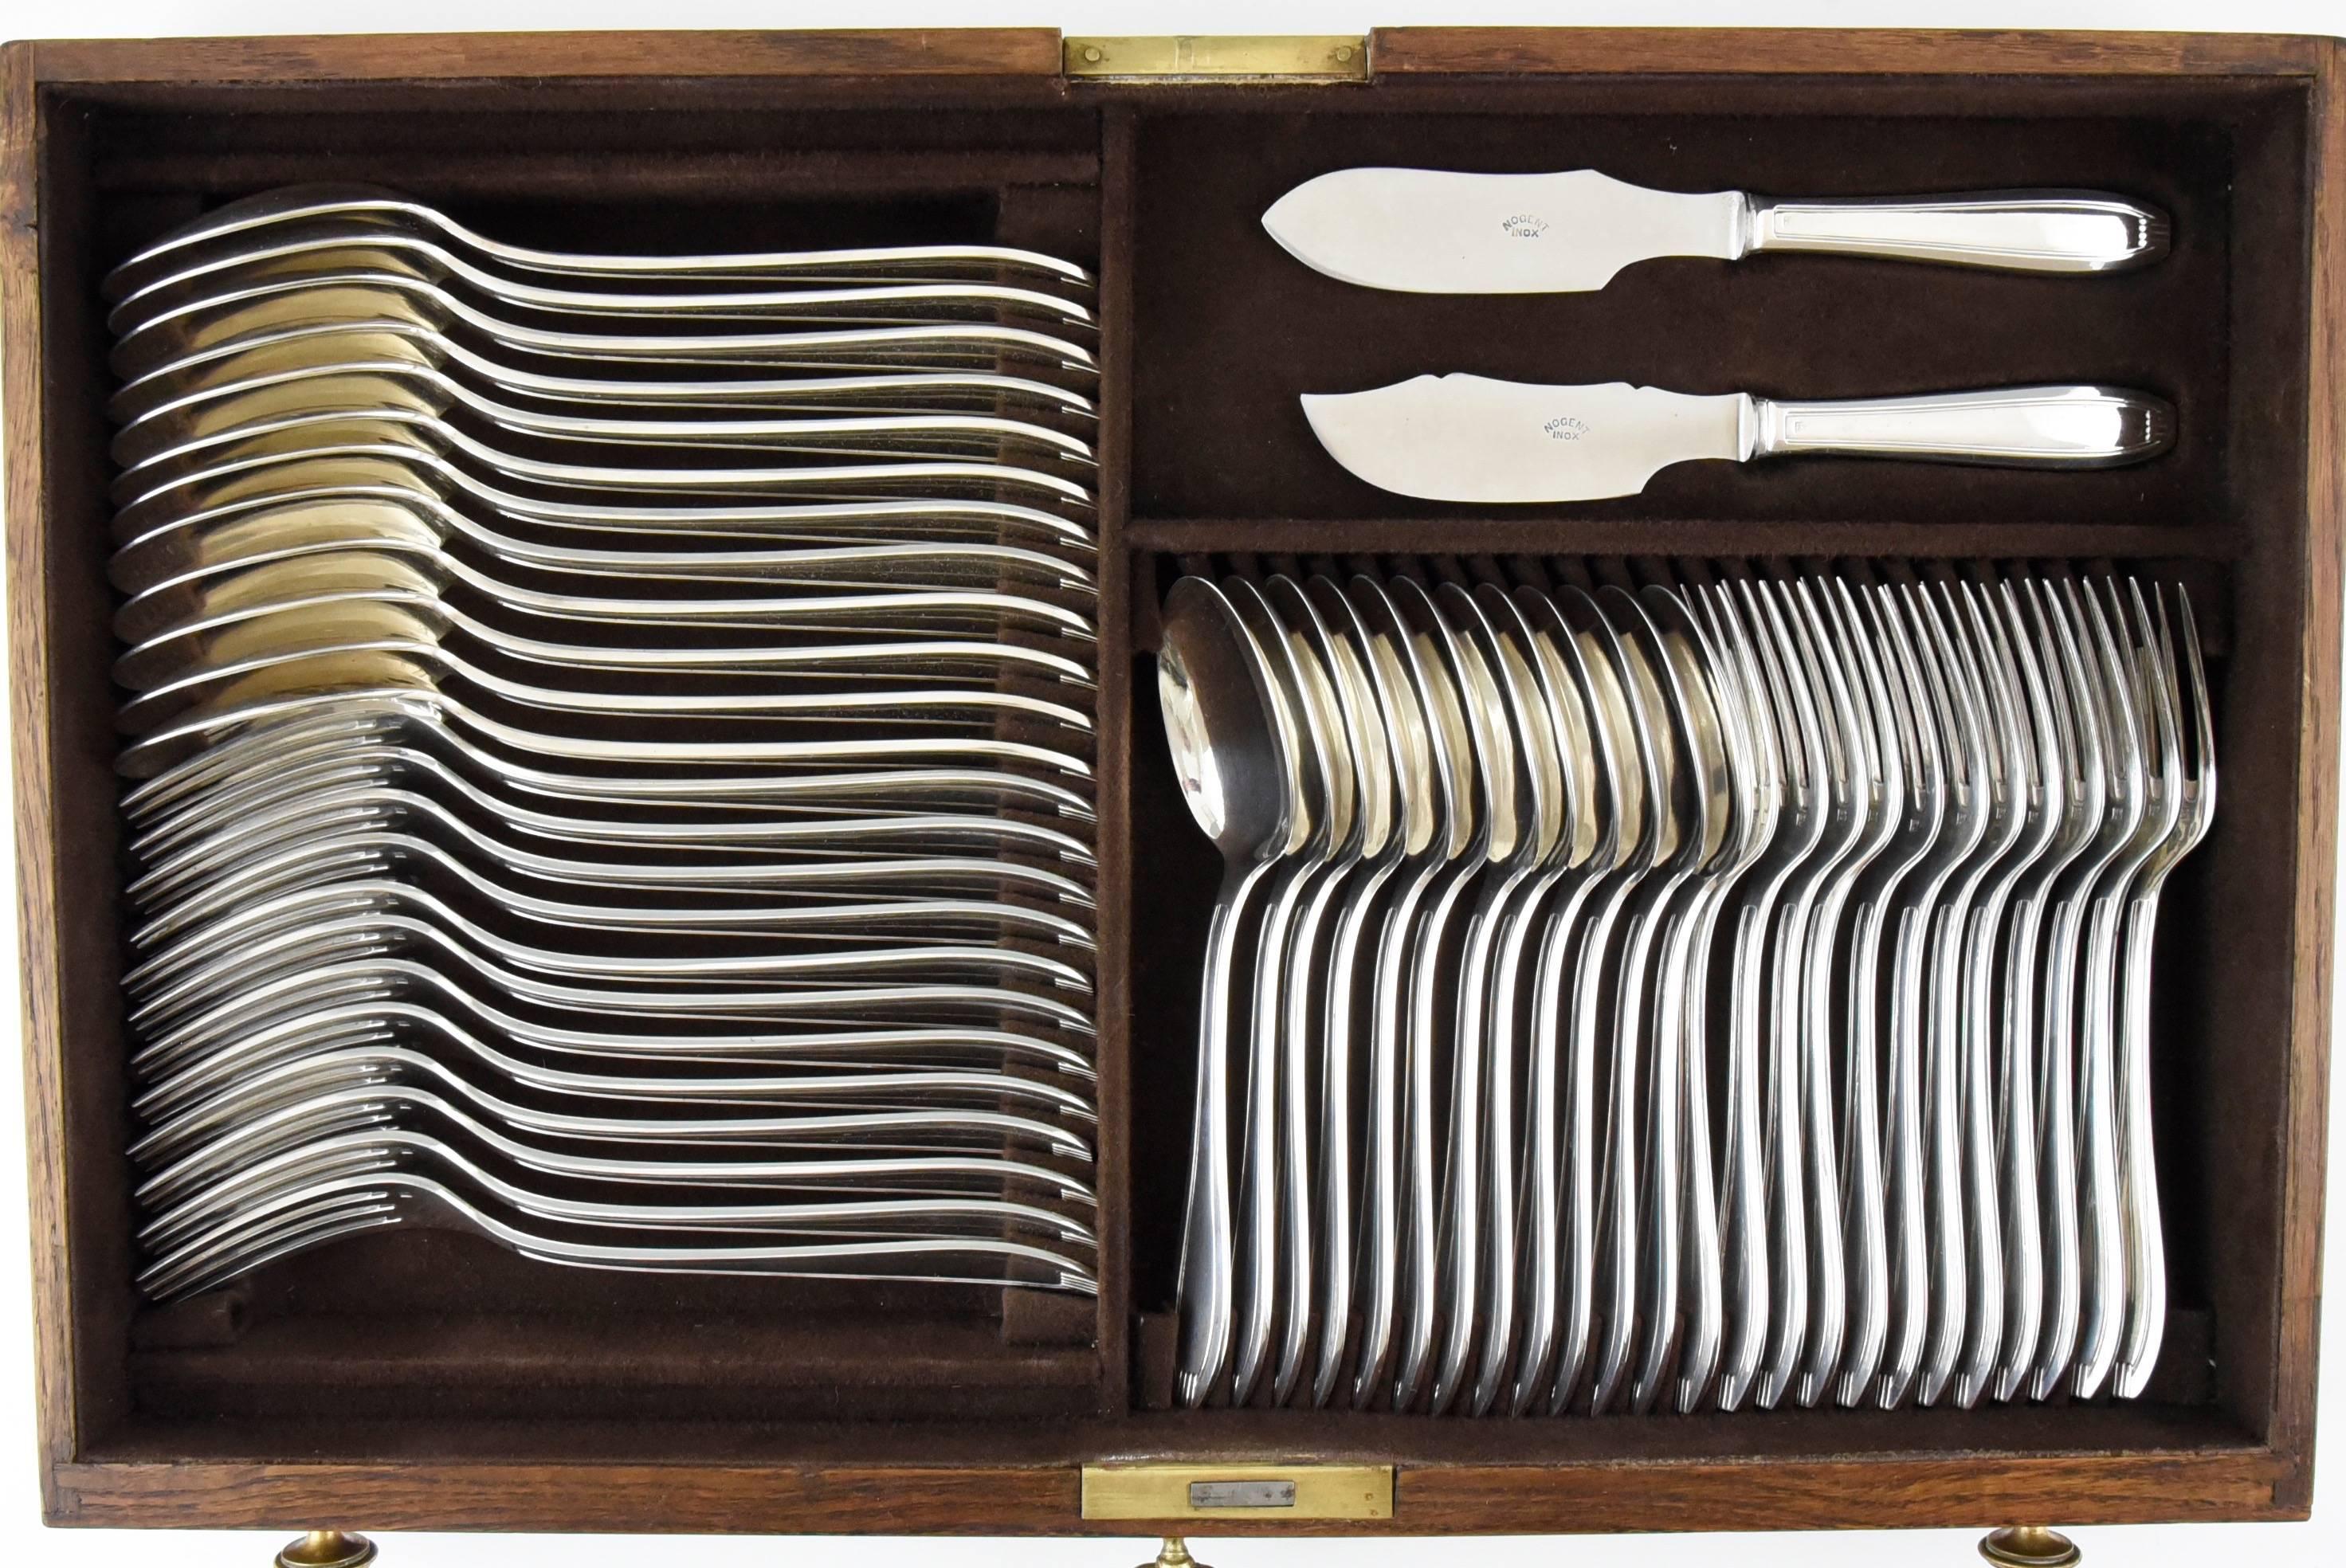 French Art Deco Silver Plated 178 pc cutlery set by Frionnet in Original Case, 1930